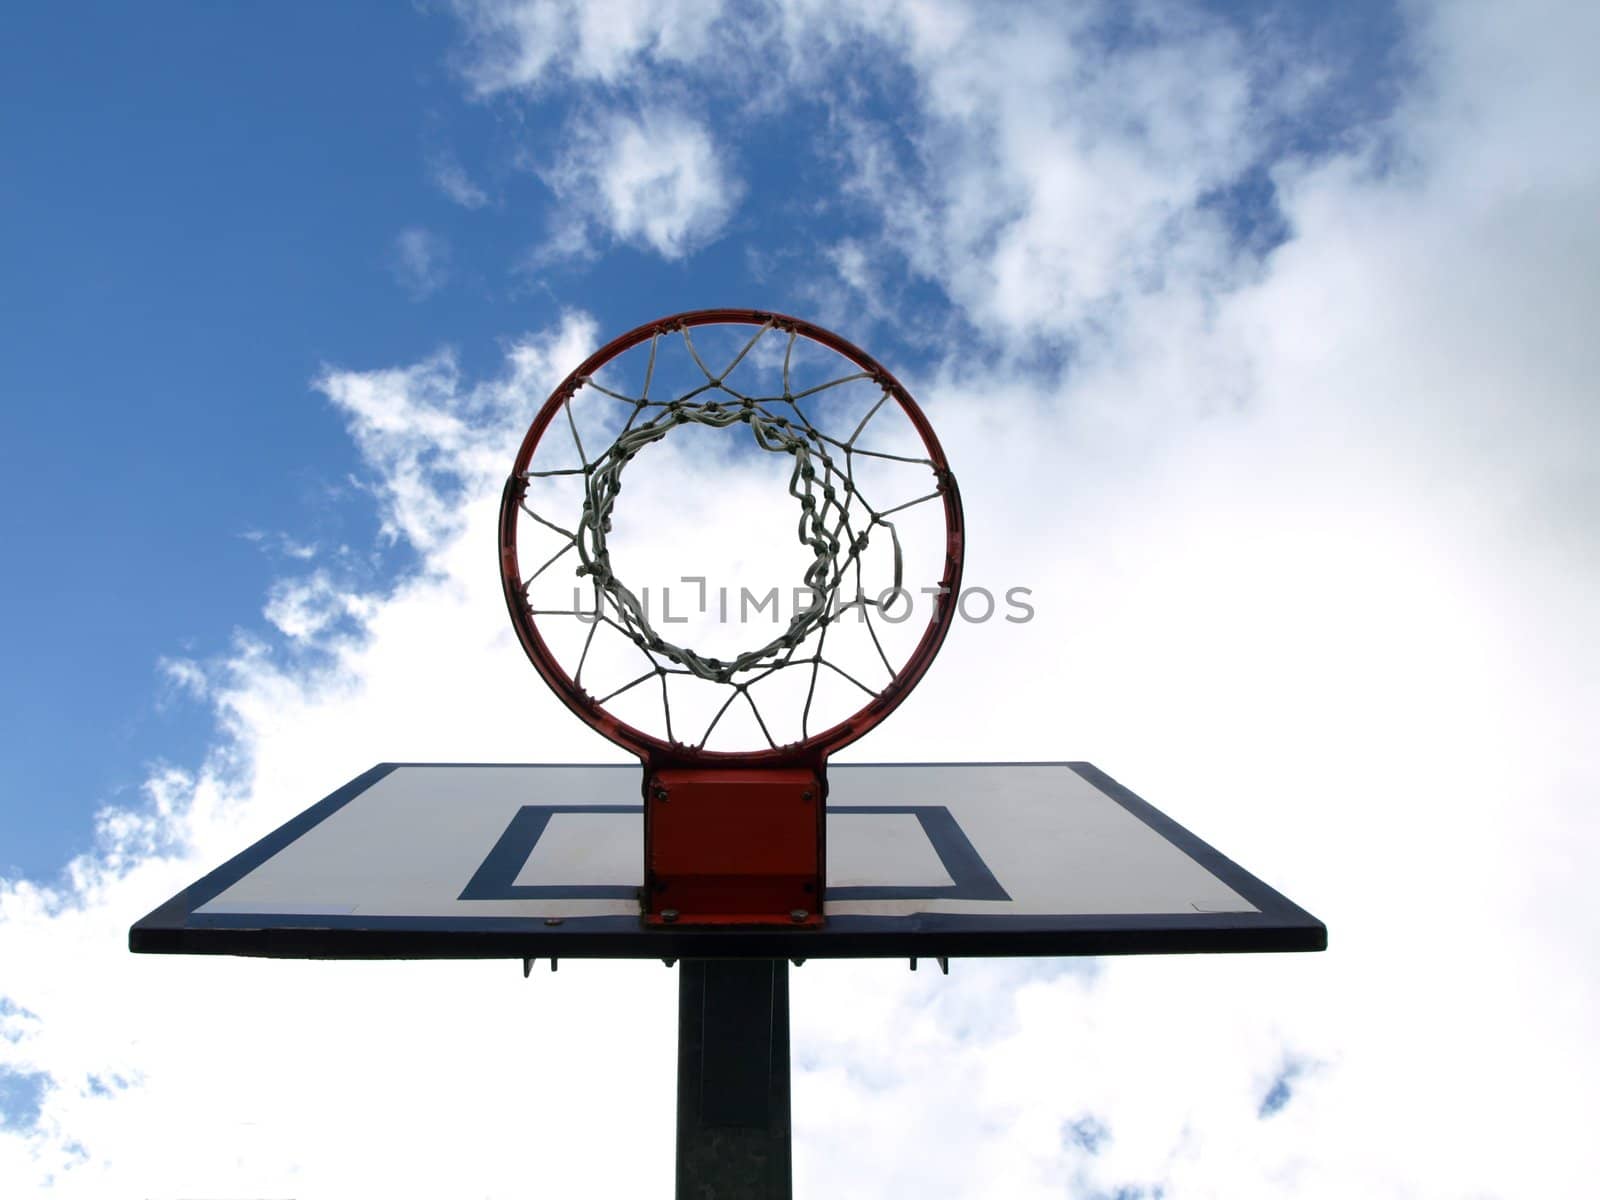 Basketball hoop under blue sky with clouds